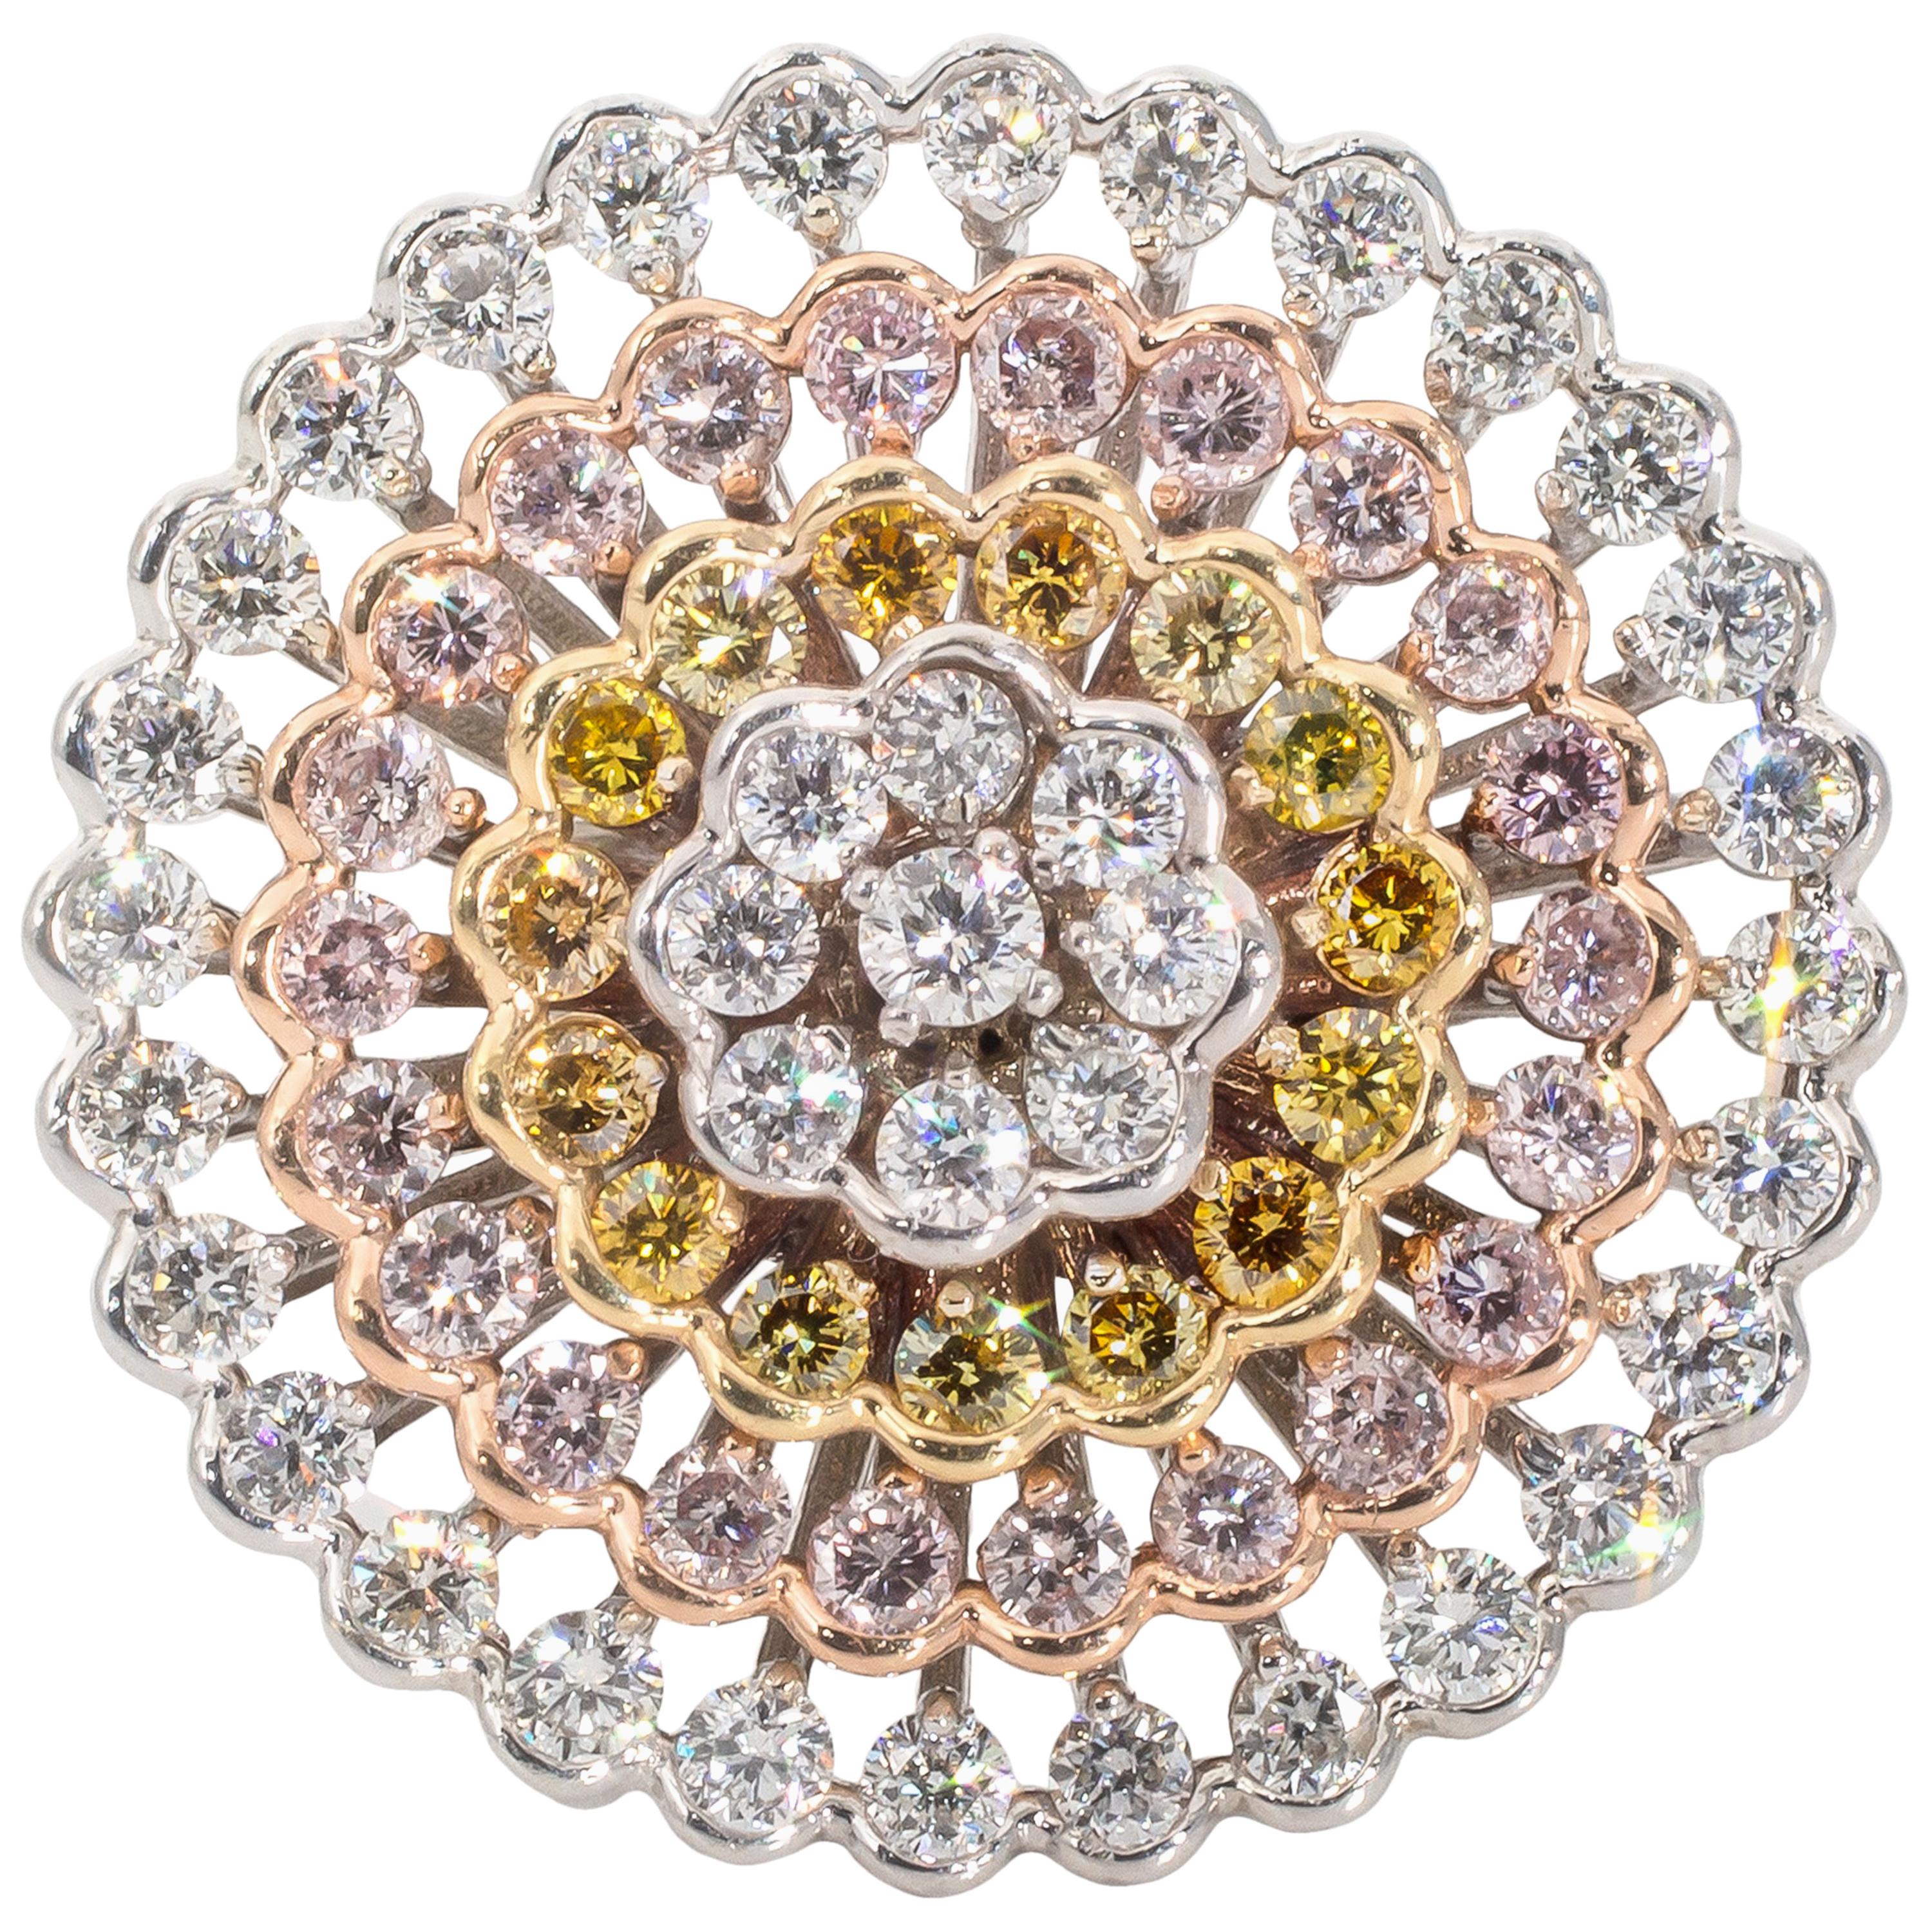 1.42 Carat Total Weight Natural Pink, Yellow, and White Diamond Ring For Sale